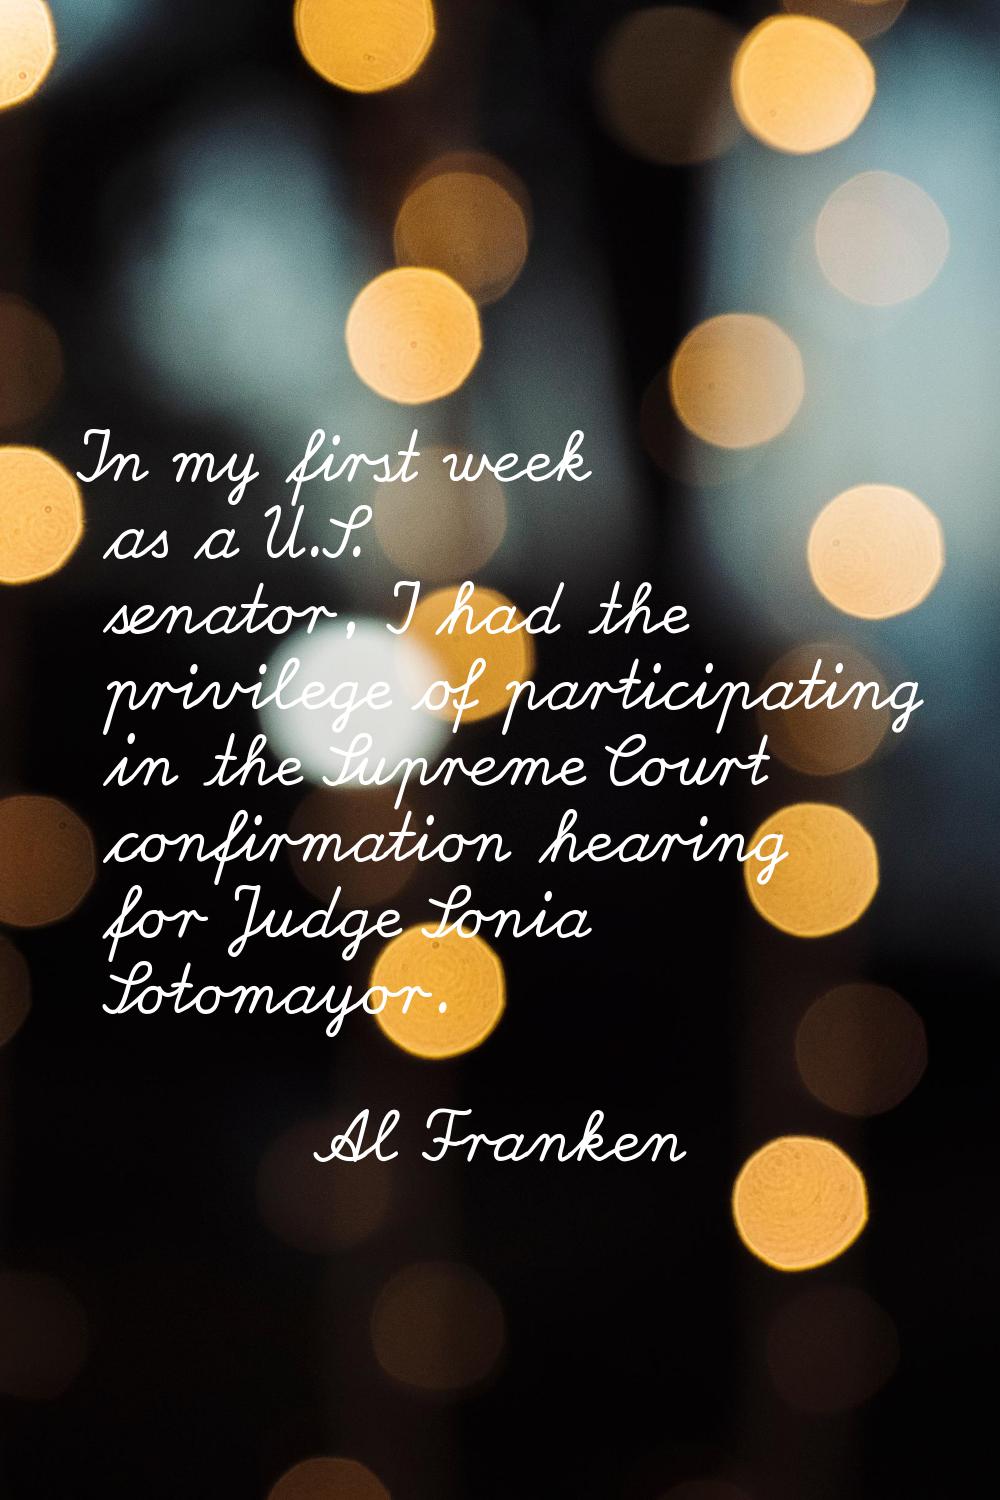 In my first week as a U.S. senator, I had the privilege of participating in the Supreme Court confi